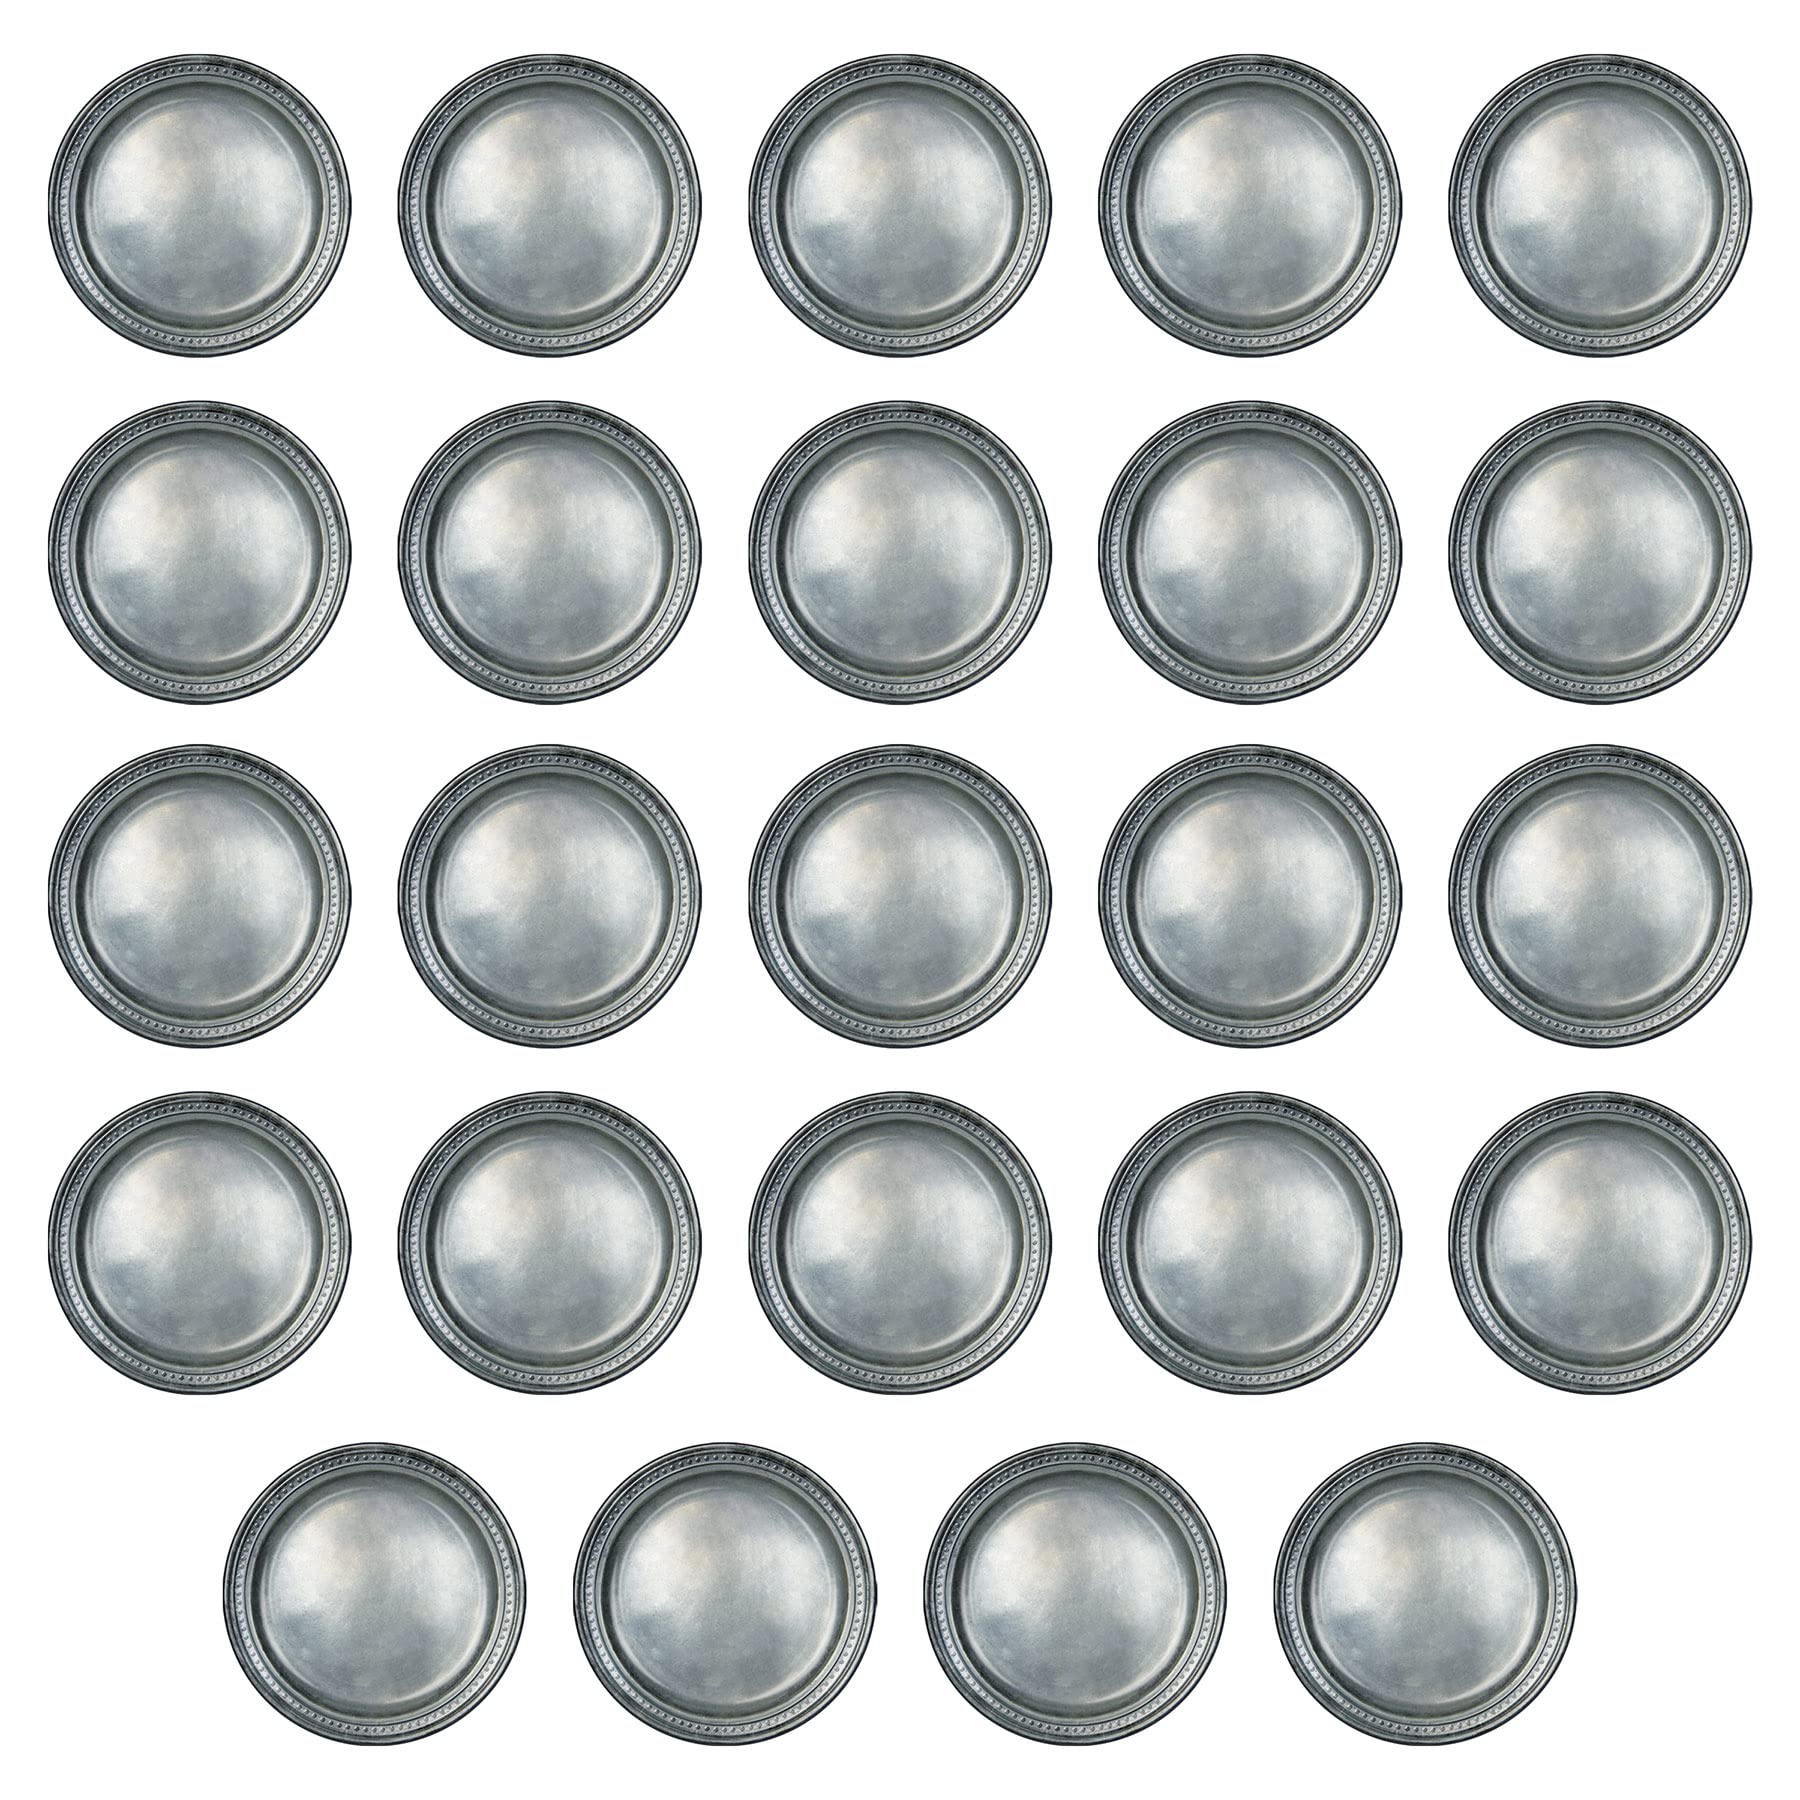 Beistle 24 Piece All Occasion Disposable Pewter Paper Plates Medieval Party Supplies – Pirate And Halloween Tableware, 9